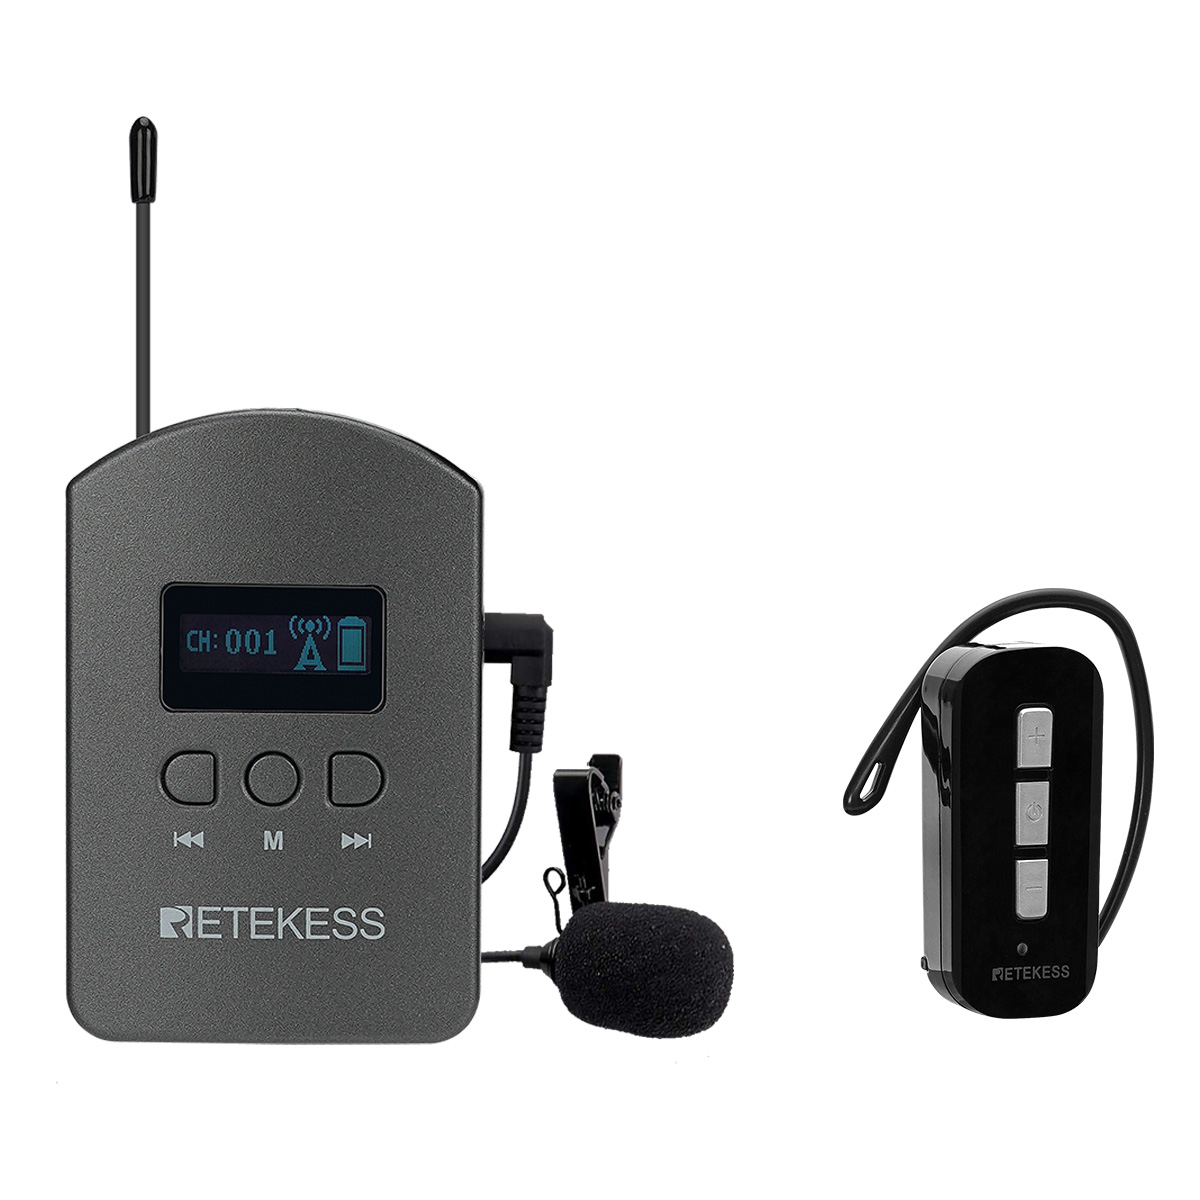 whisper wireless tour guide system